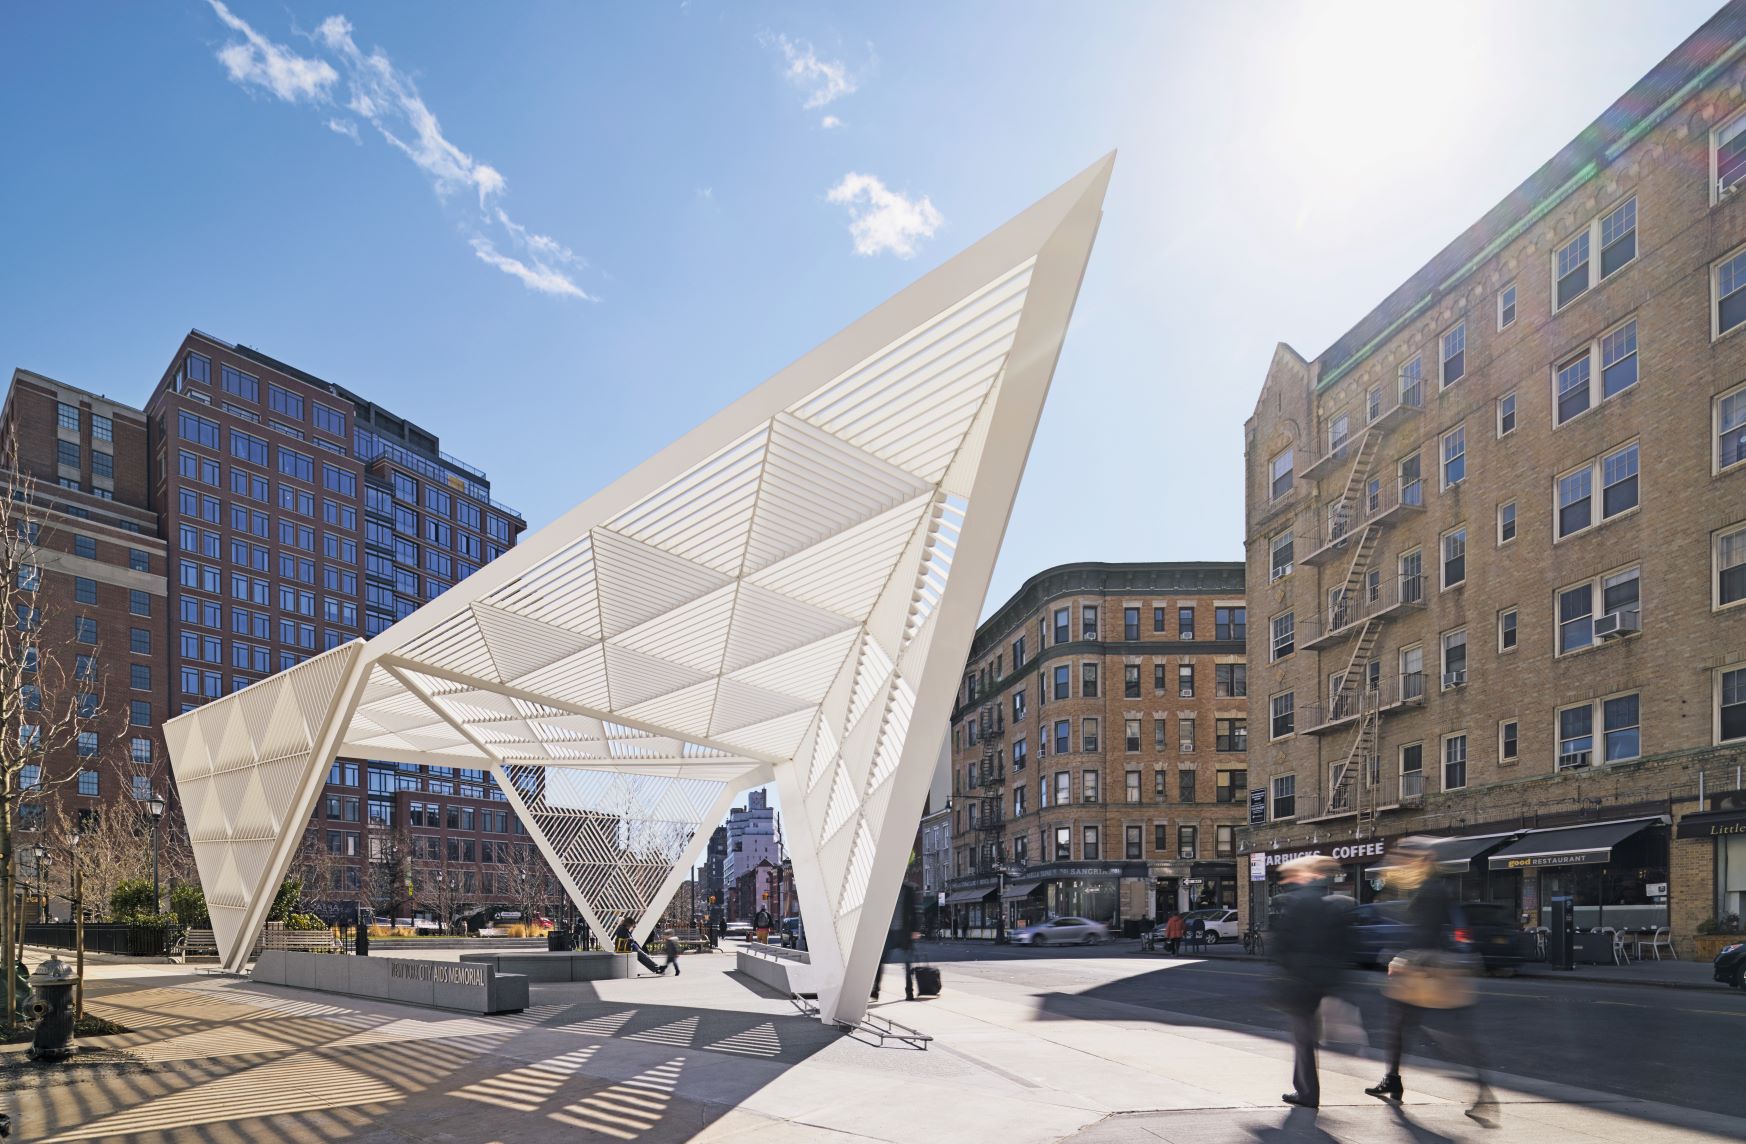 New York City AIDS Memorial, New York City, New York, USA. Studio AI Architects (2016). Photograph by Edward Caruso